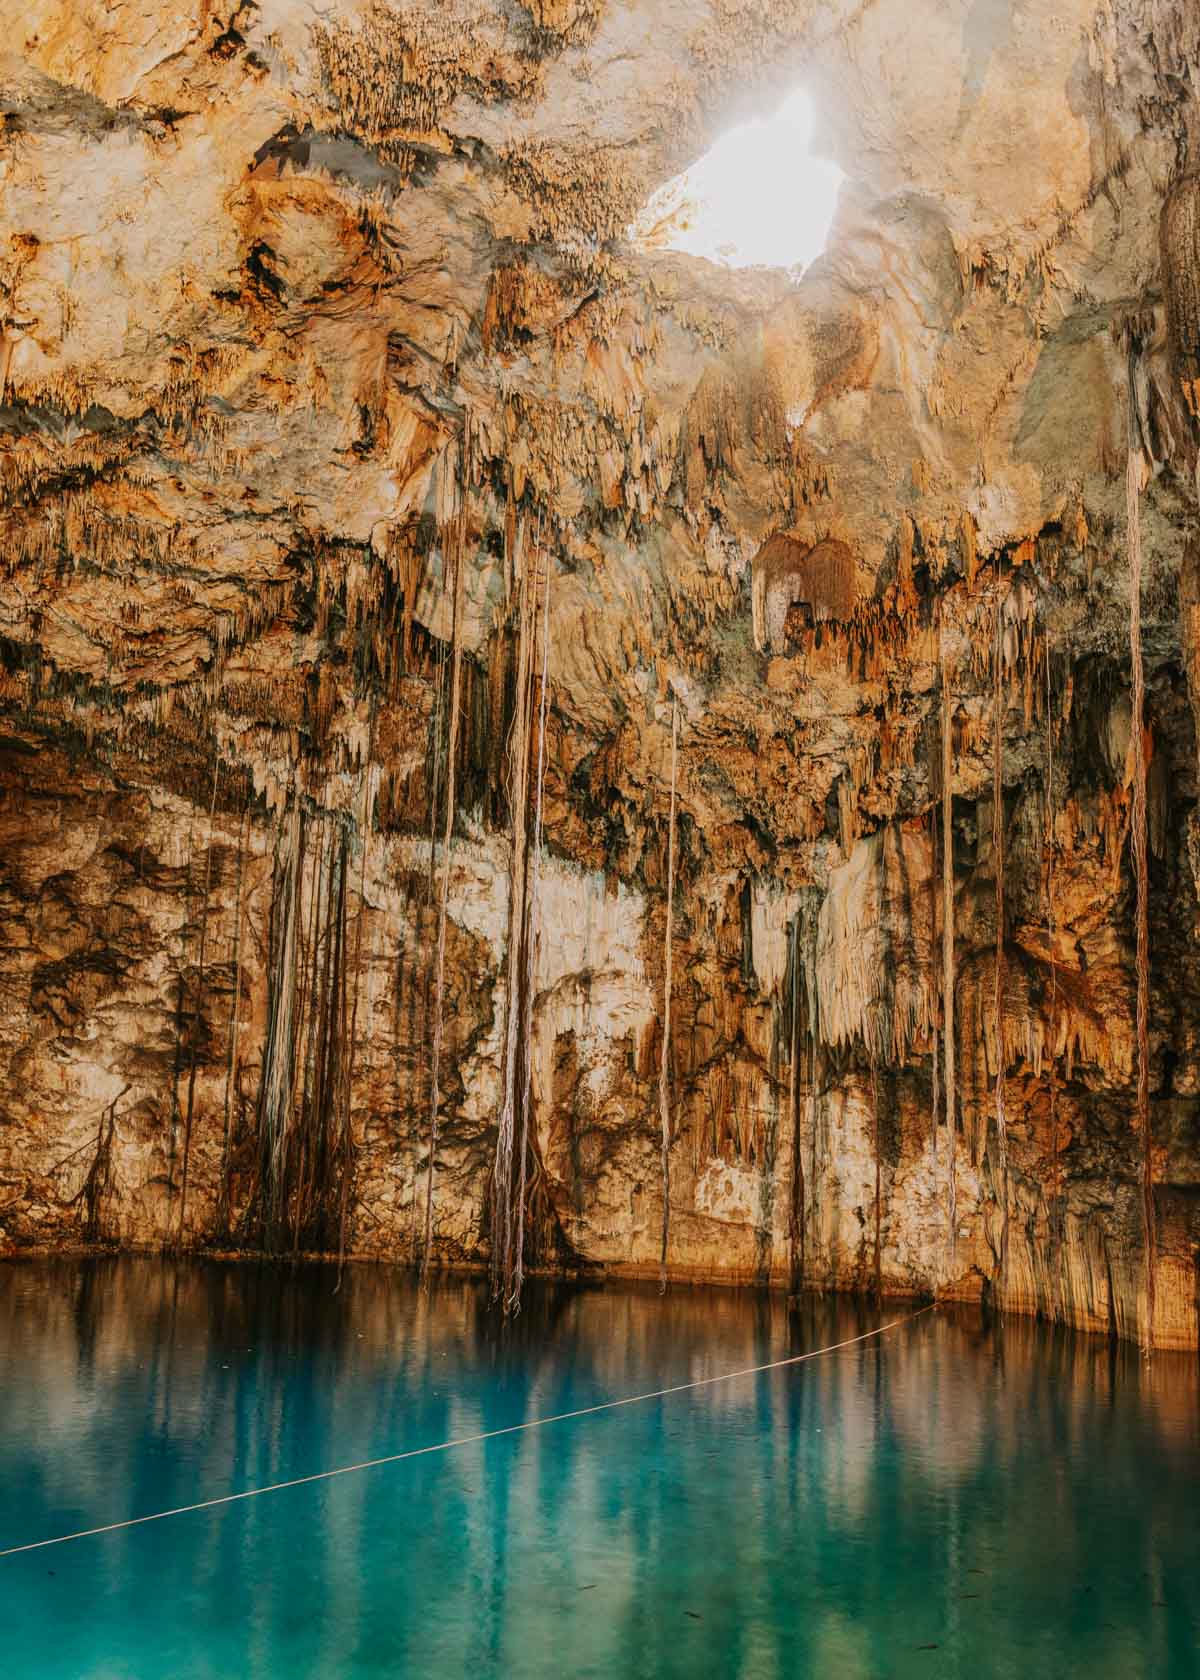 Honest Review of Dzitnup Cenotes + How to Visit